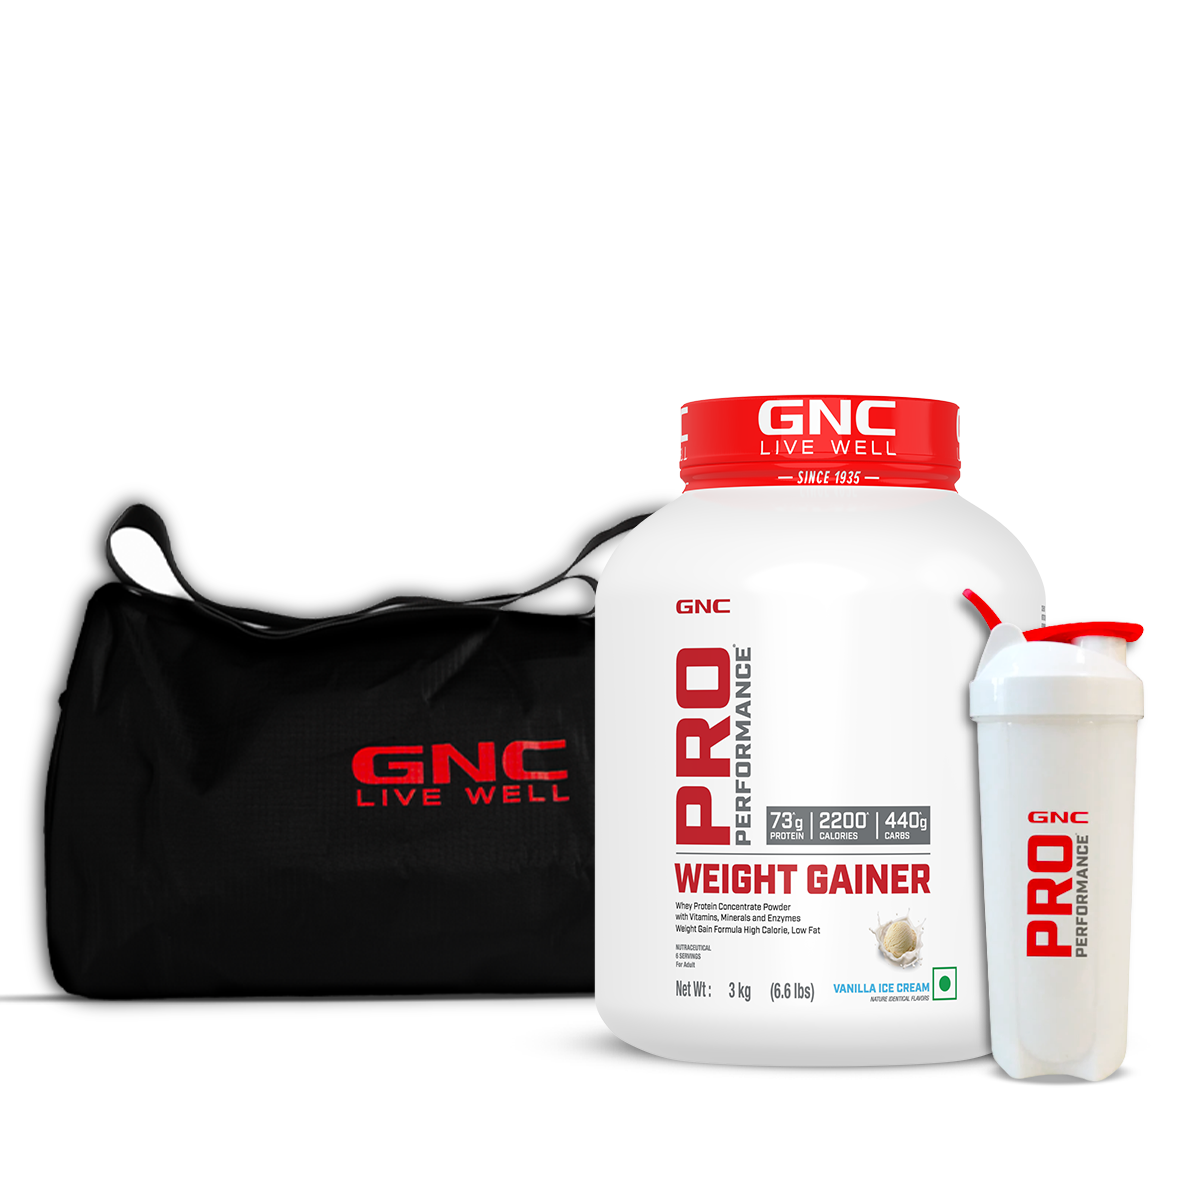 Gain & Flex Combo - | Weight Gainer with Gym Bag & Shaker | High-Calorie Formula For Healthy Body Gains